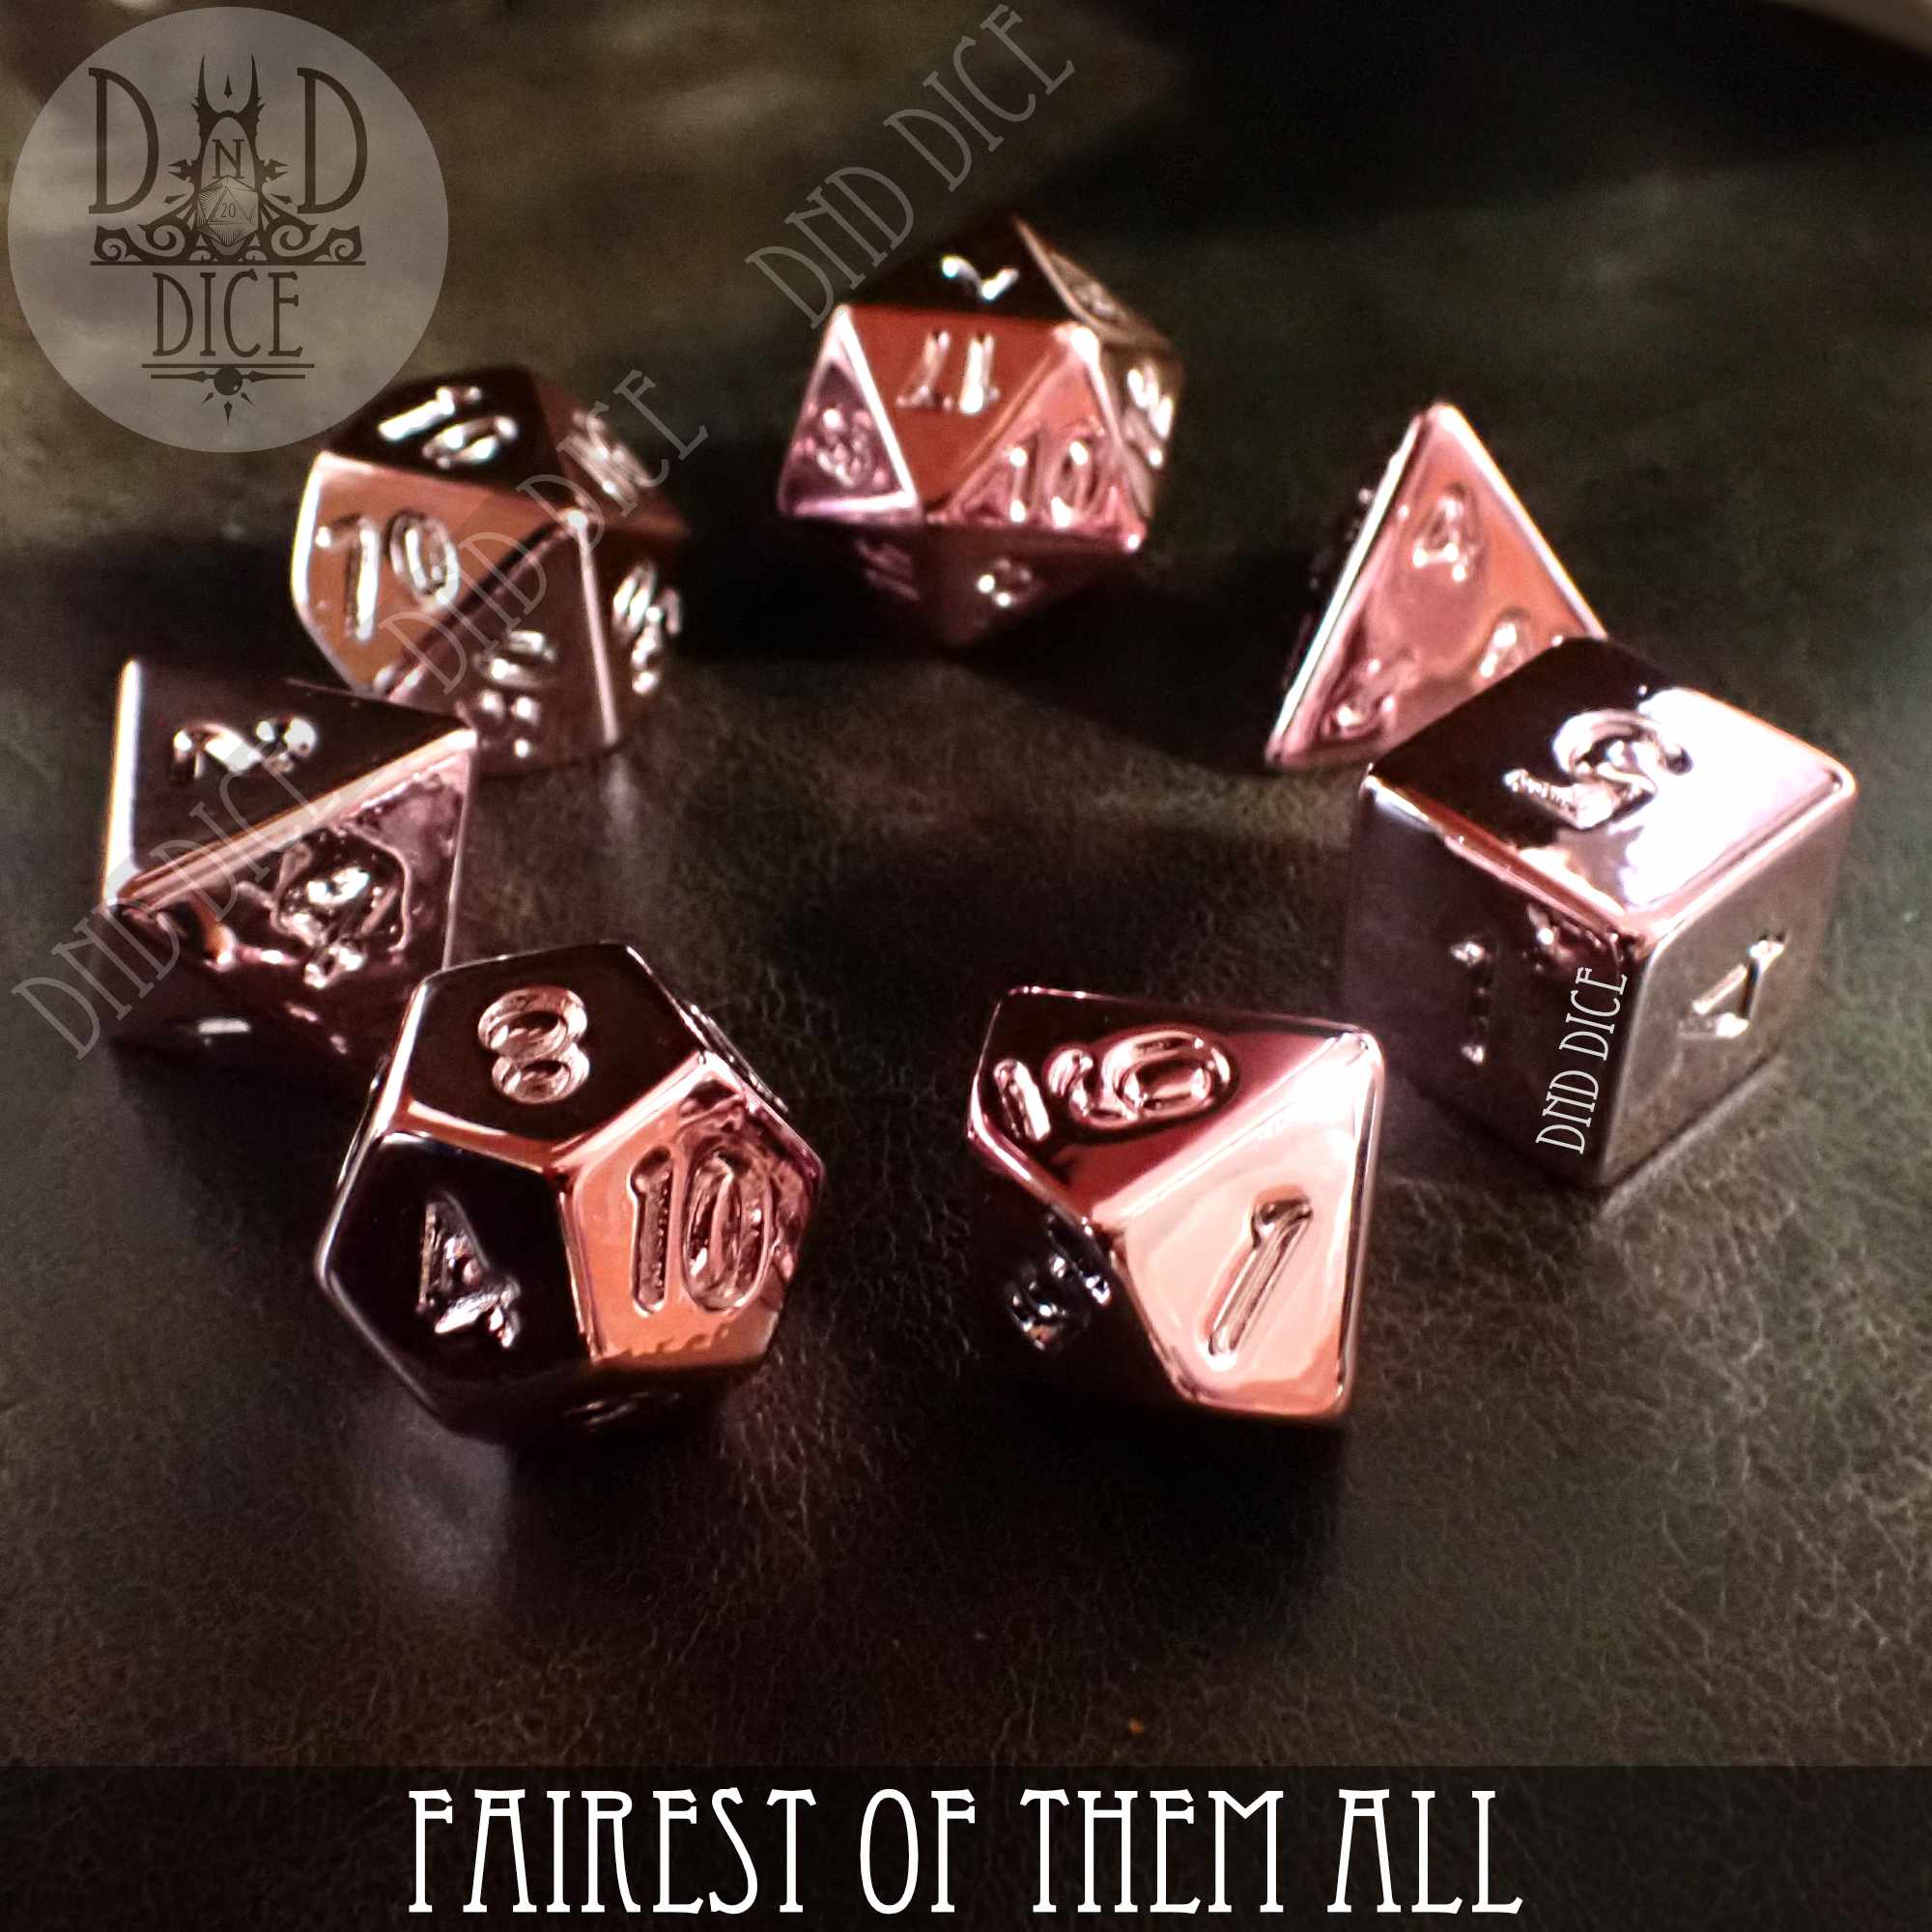 Fairest of Them All Dice Set